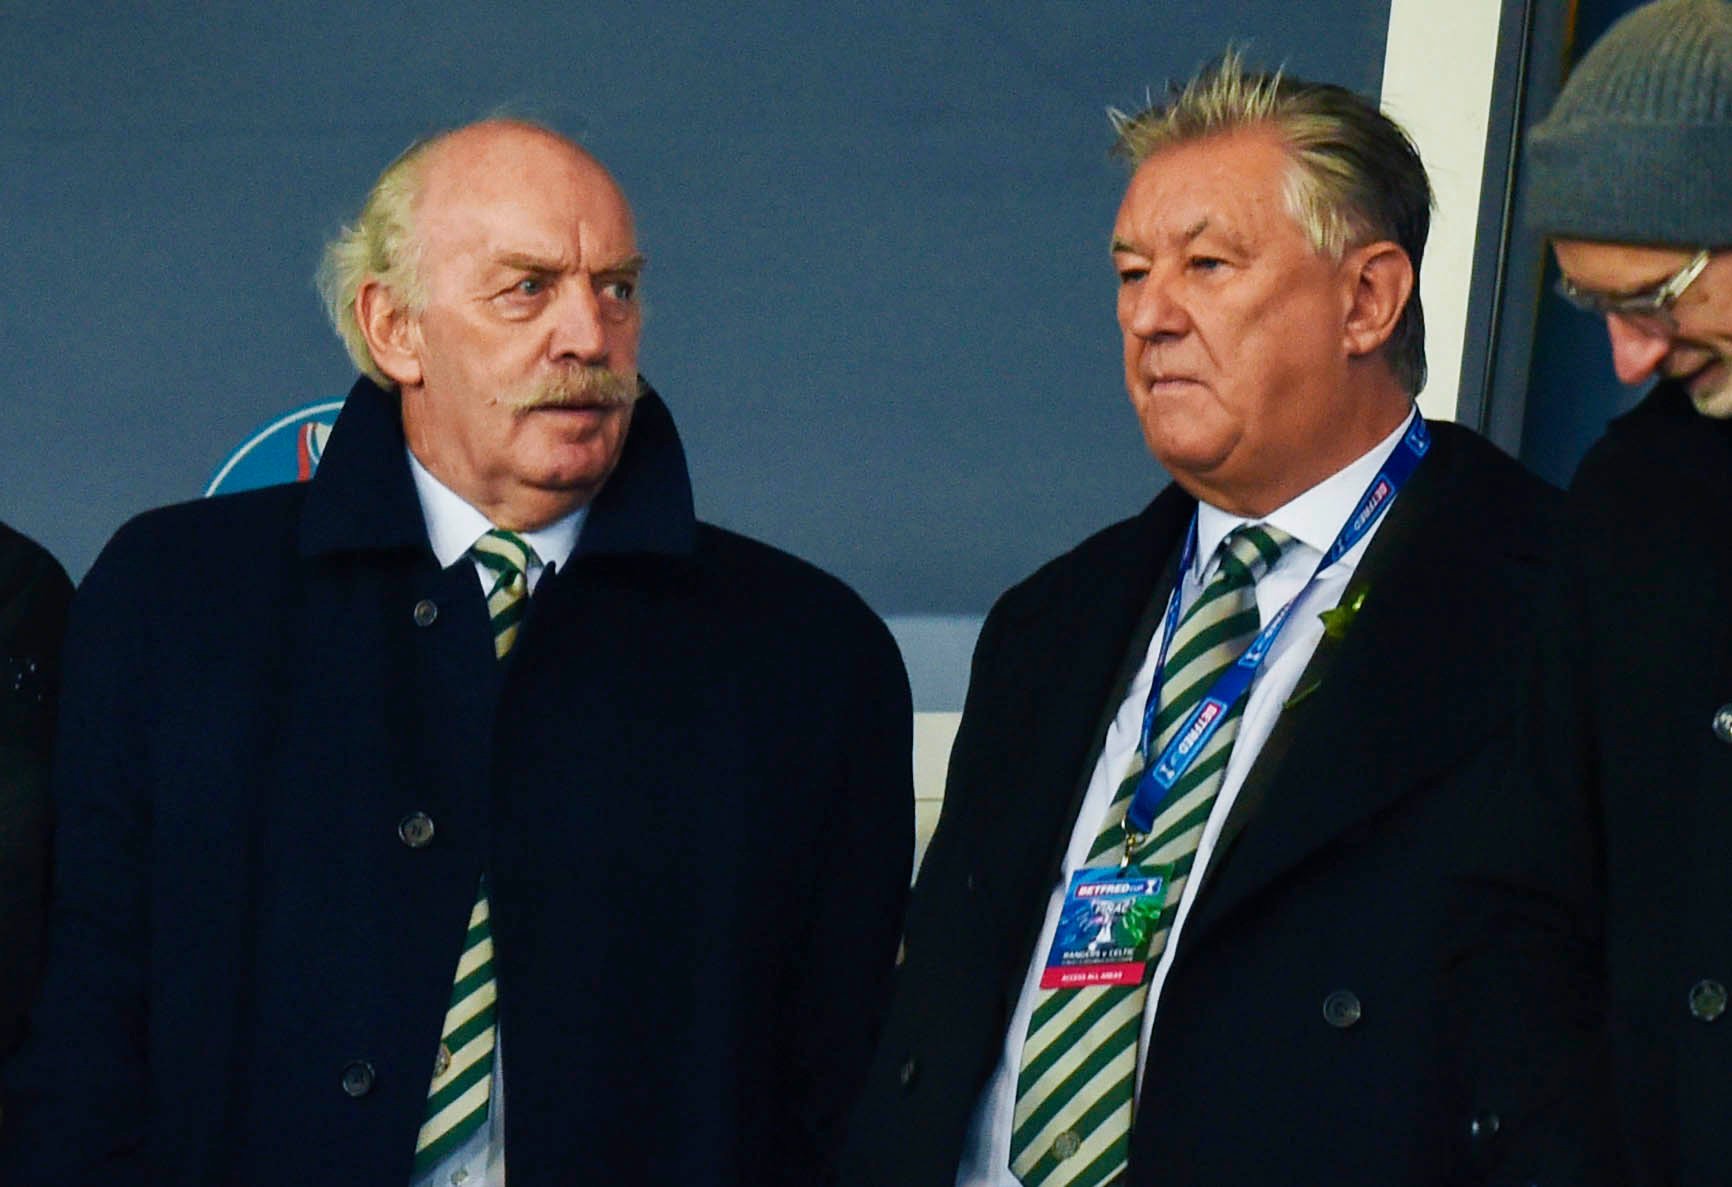 Celtic chief Dermot Desmond correct to reportedly pull out of Atlantic League pipe dream